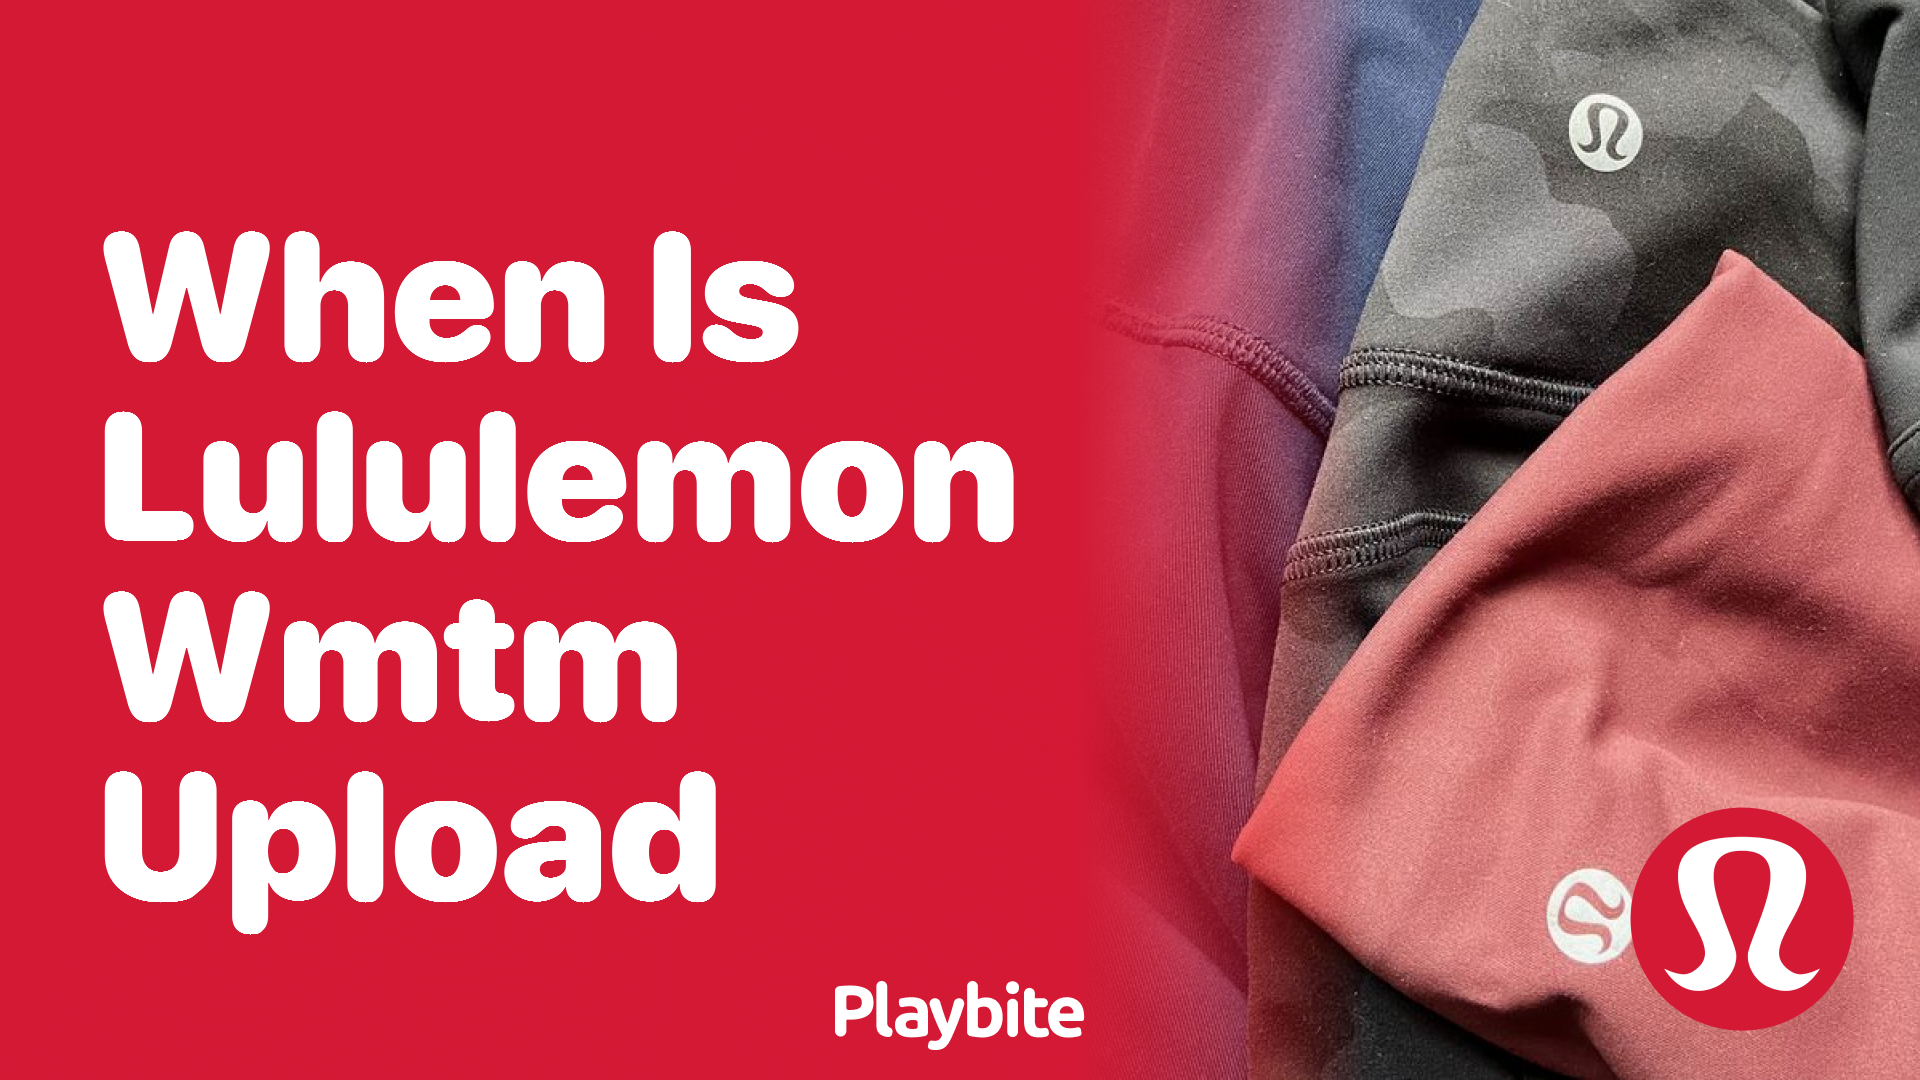 Does Lululemon Price Match In-Store? - Playbite